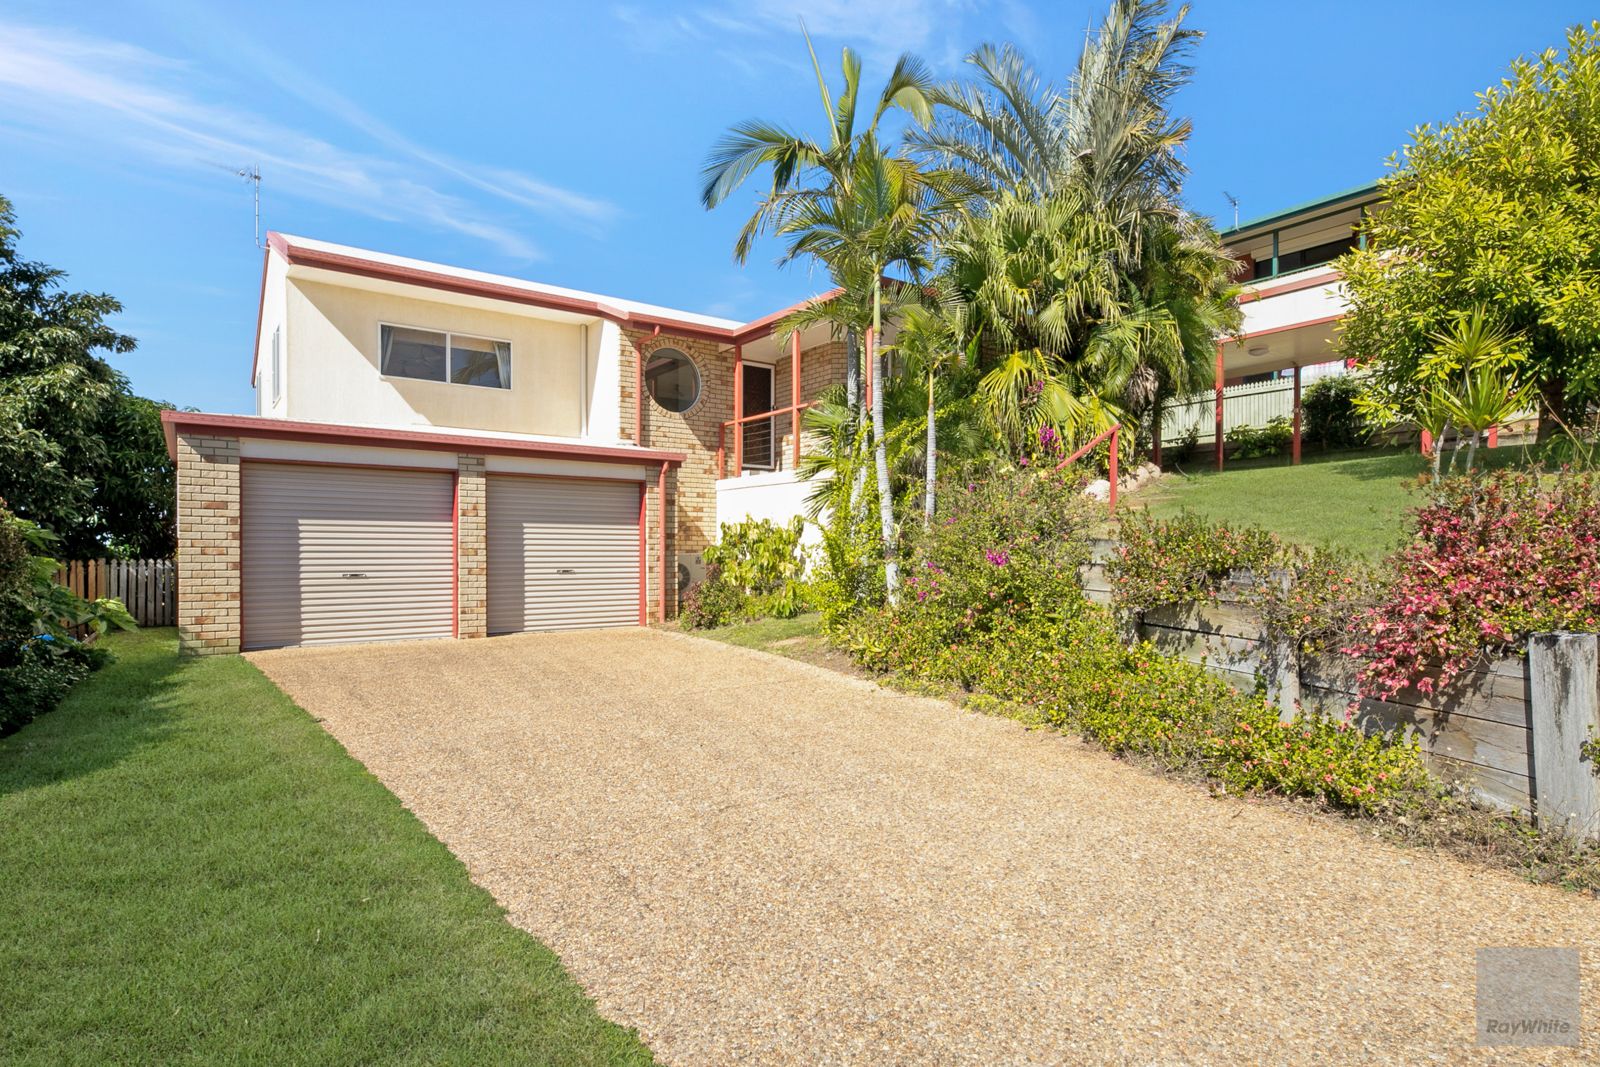 9 Baglow Avenue - Tenant Approved, Yeppoon QLD 4703, Image 1